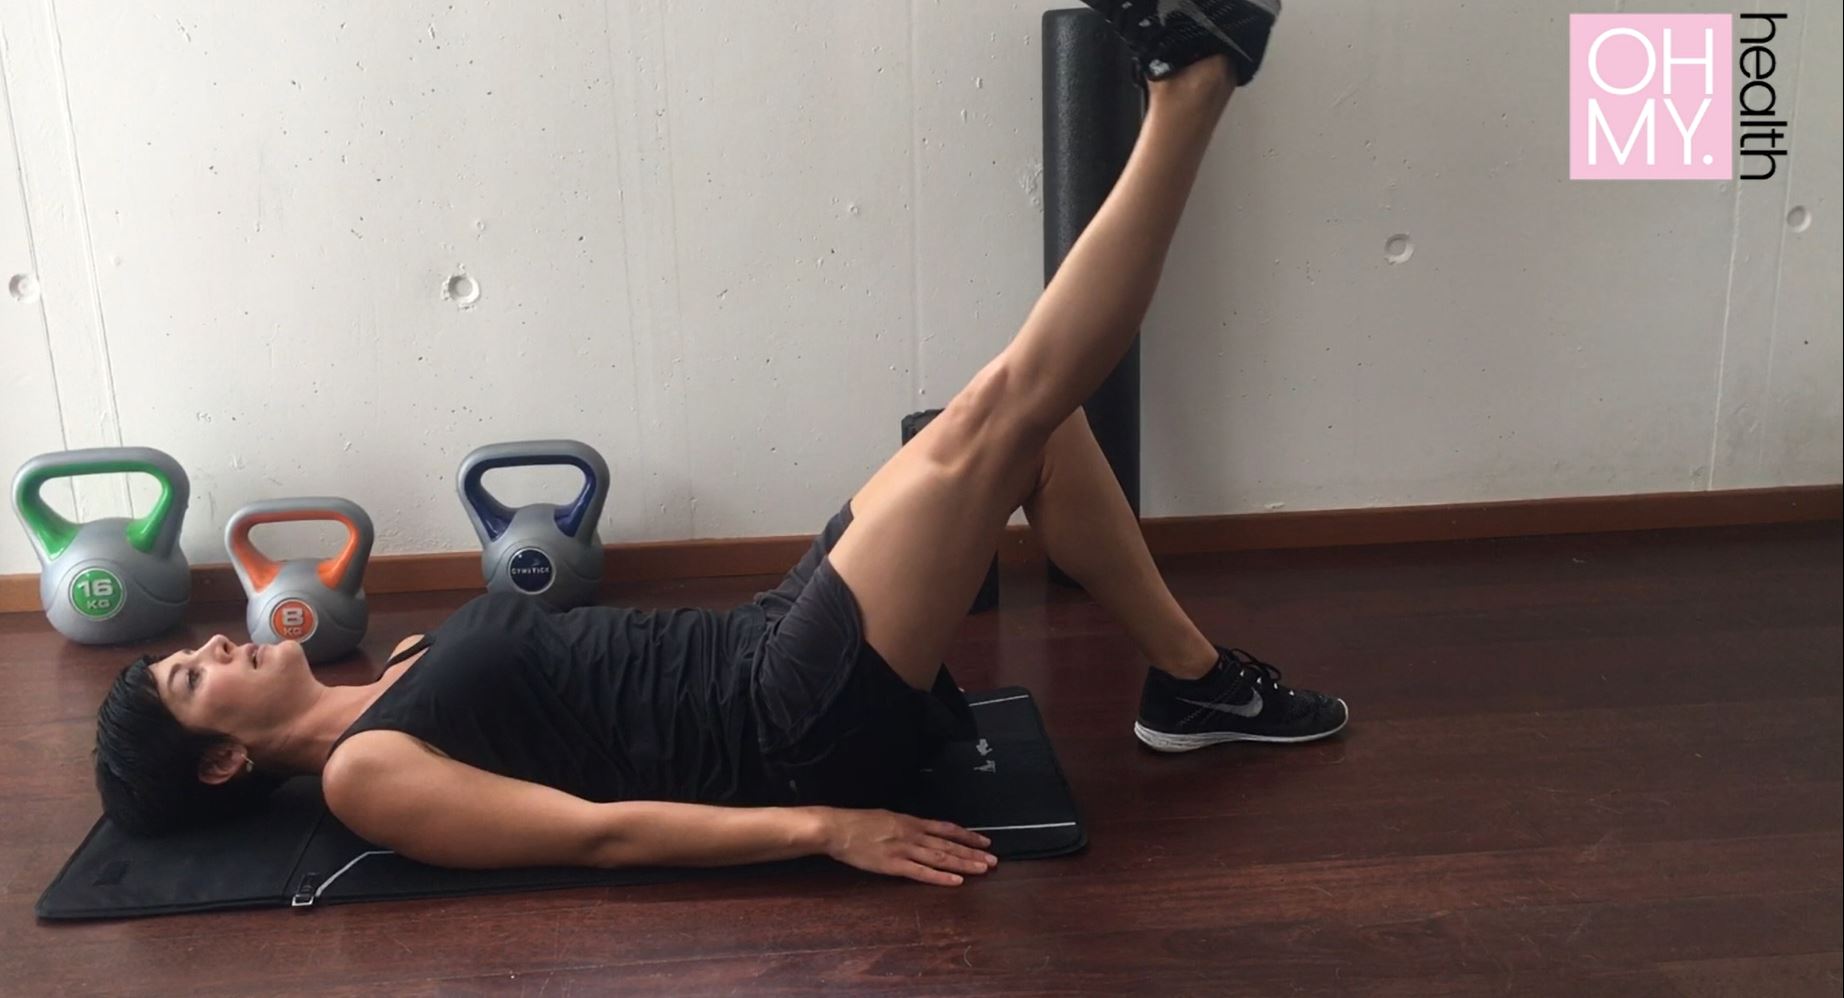 The 7 Best ACL Rehab Exercises - video and article of ...